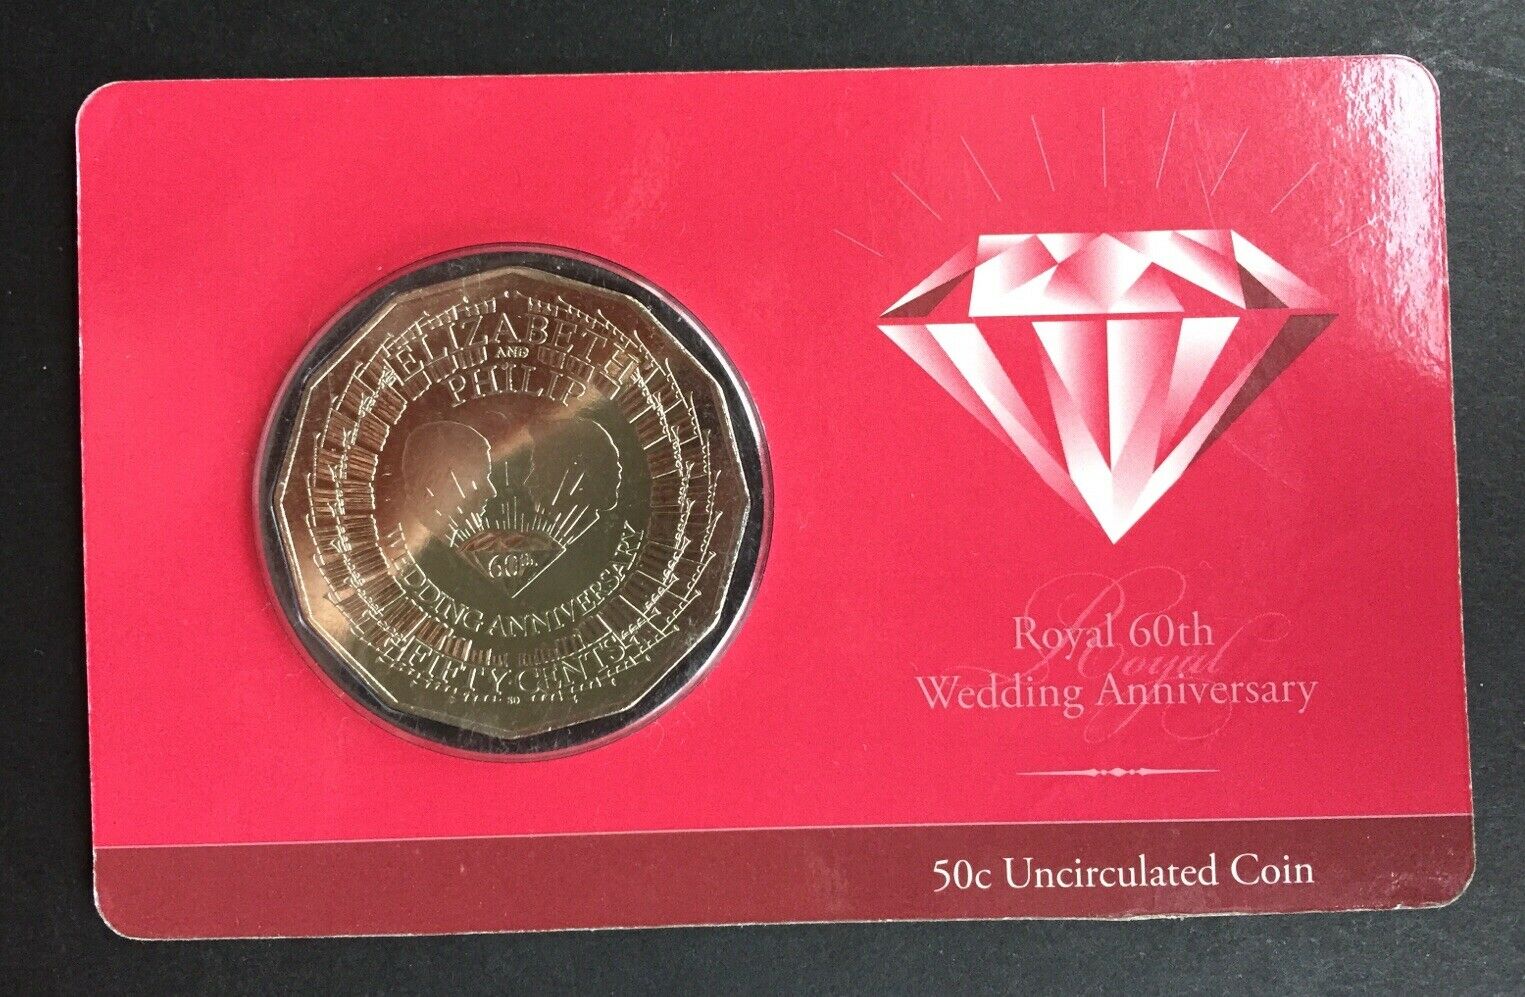 2007 RAM 50c Fifty Cents Royal 60th Wedding Anniversary Carded Uncirculated Coin